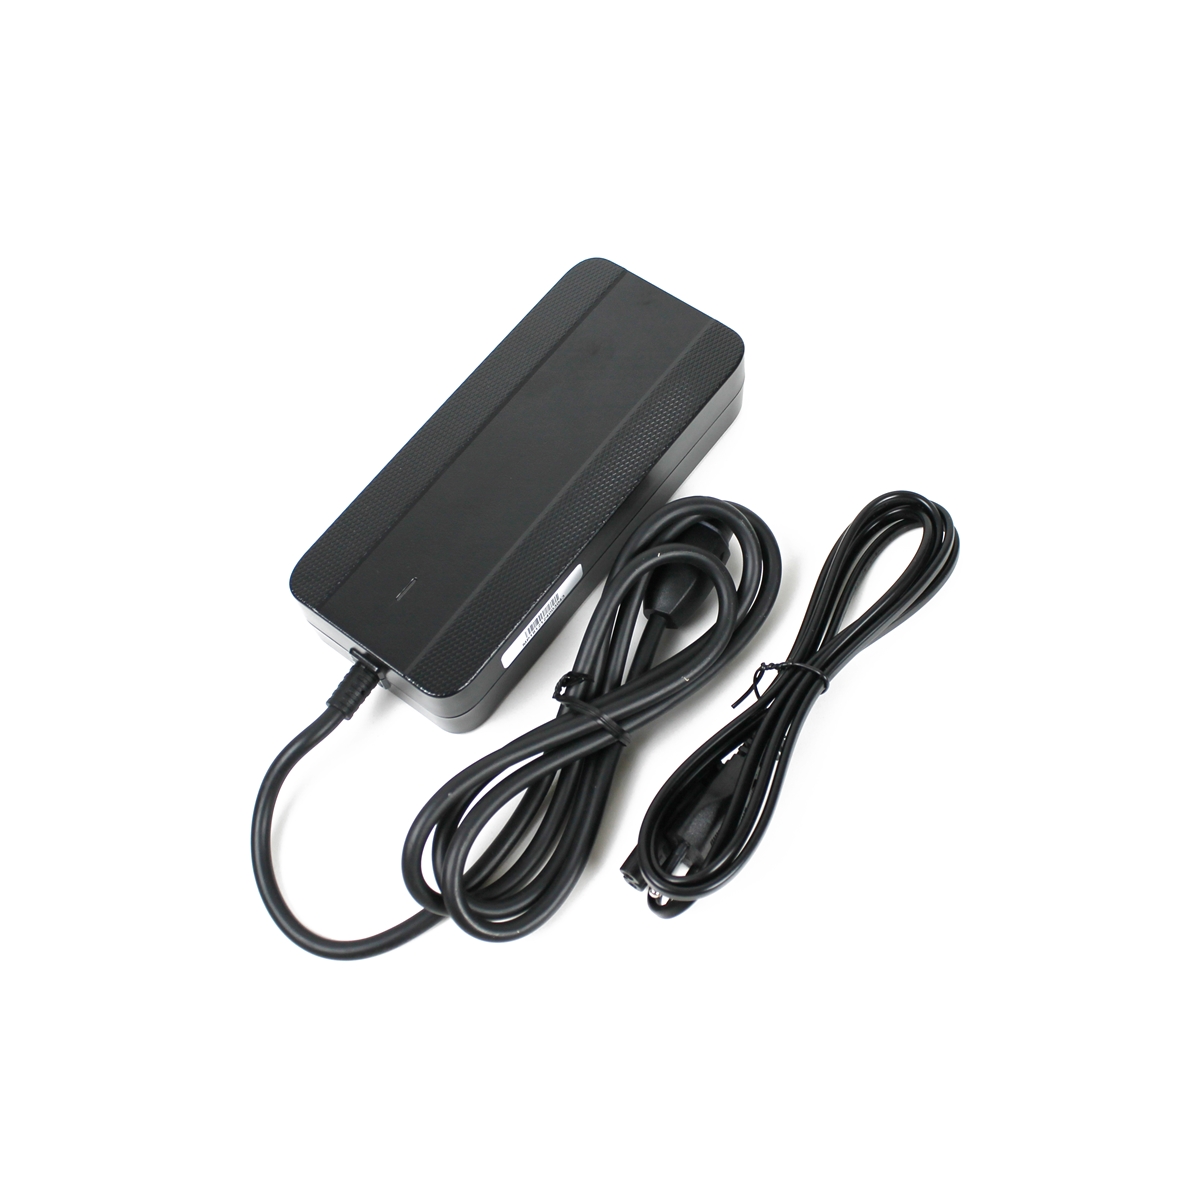 Ebike battery charger 240v for LC 2018